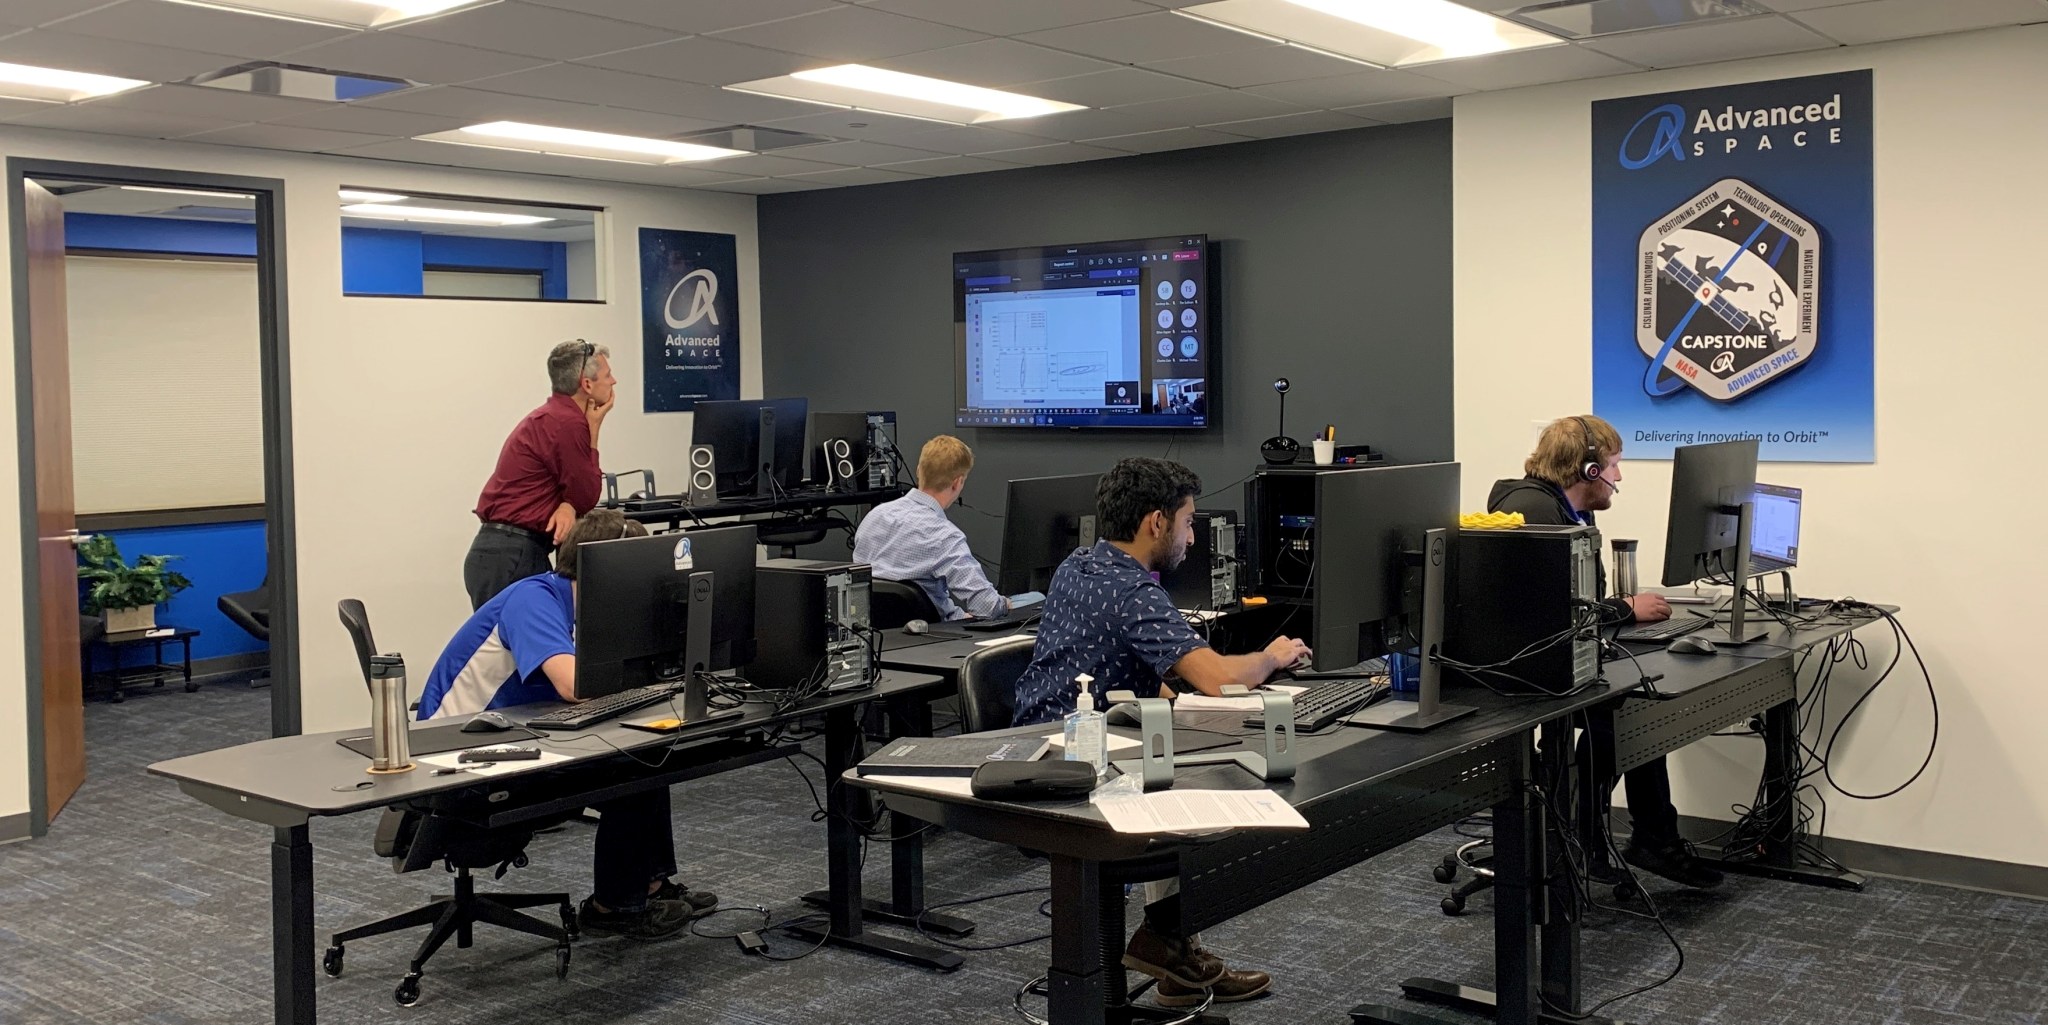 The Advanced Space team performs the third operations readiness test at the CAPSTONE mission operations center in Westminster, Colorado. 